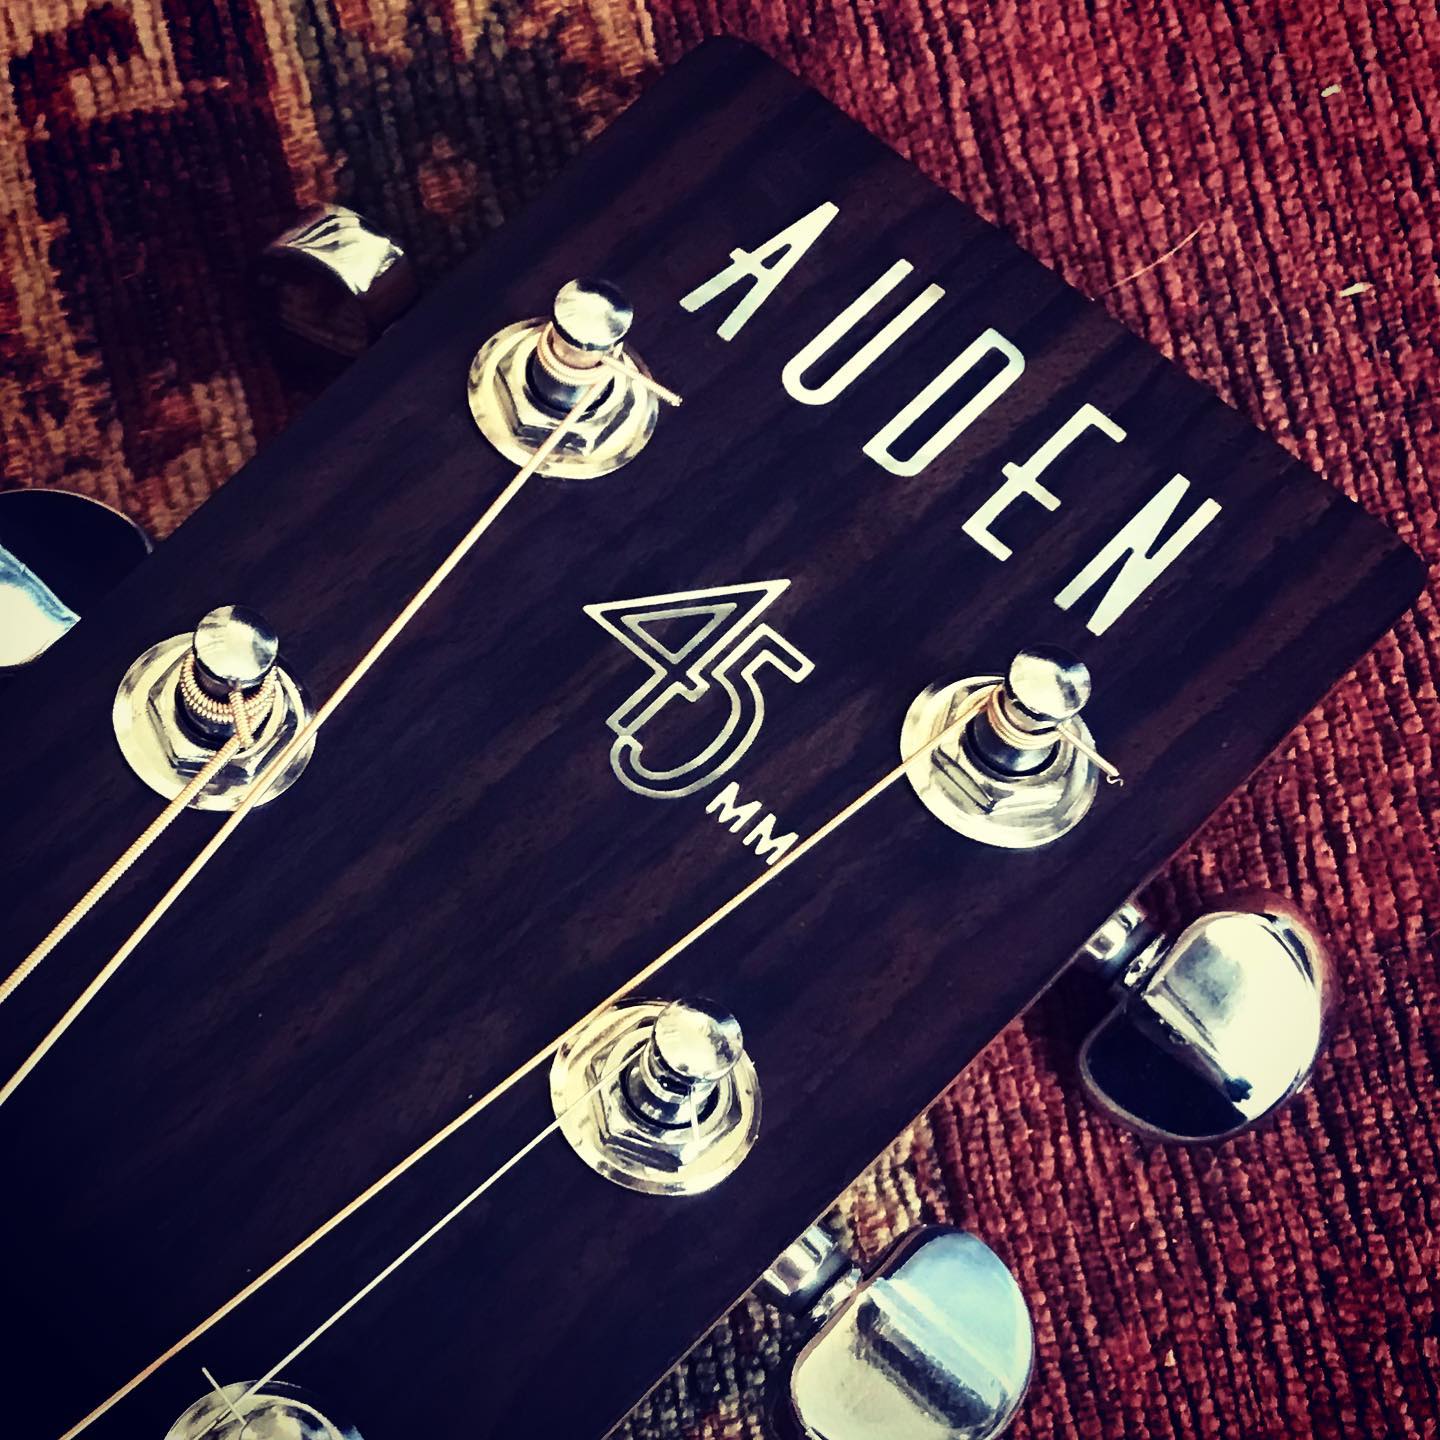 The Auden 45 Series - My Own Exclusive Design Made Reality By Auden Guirars